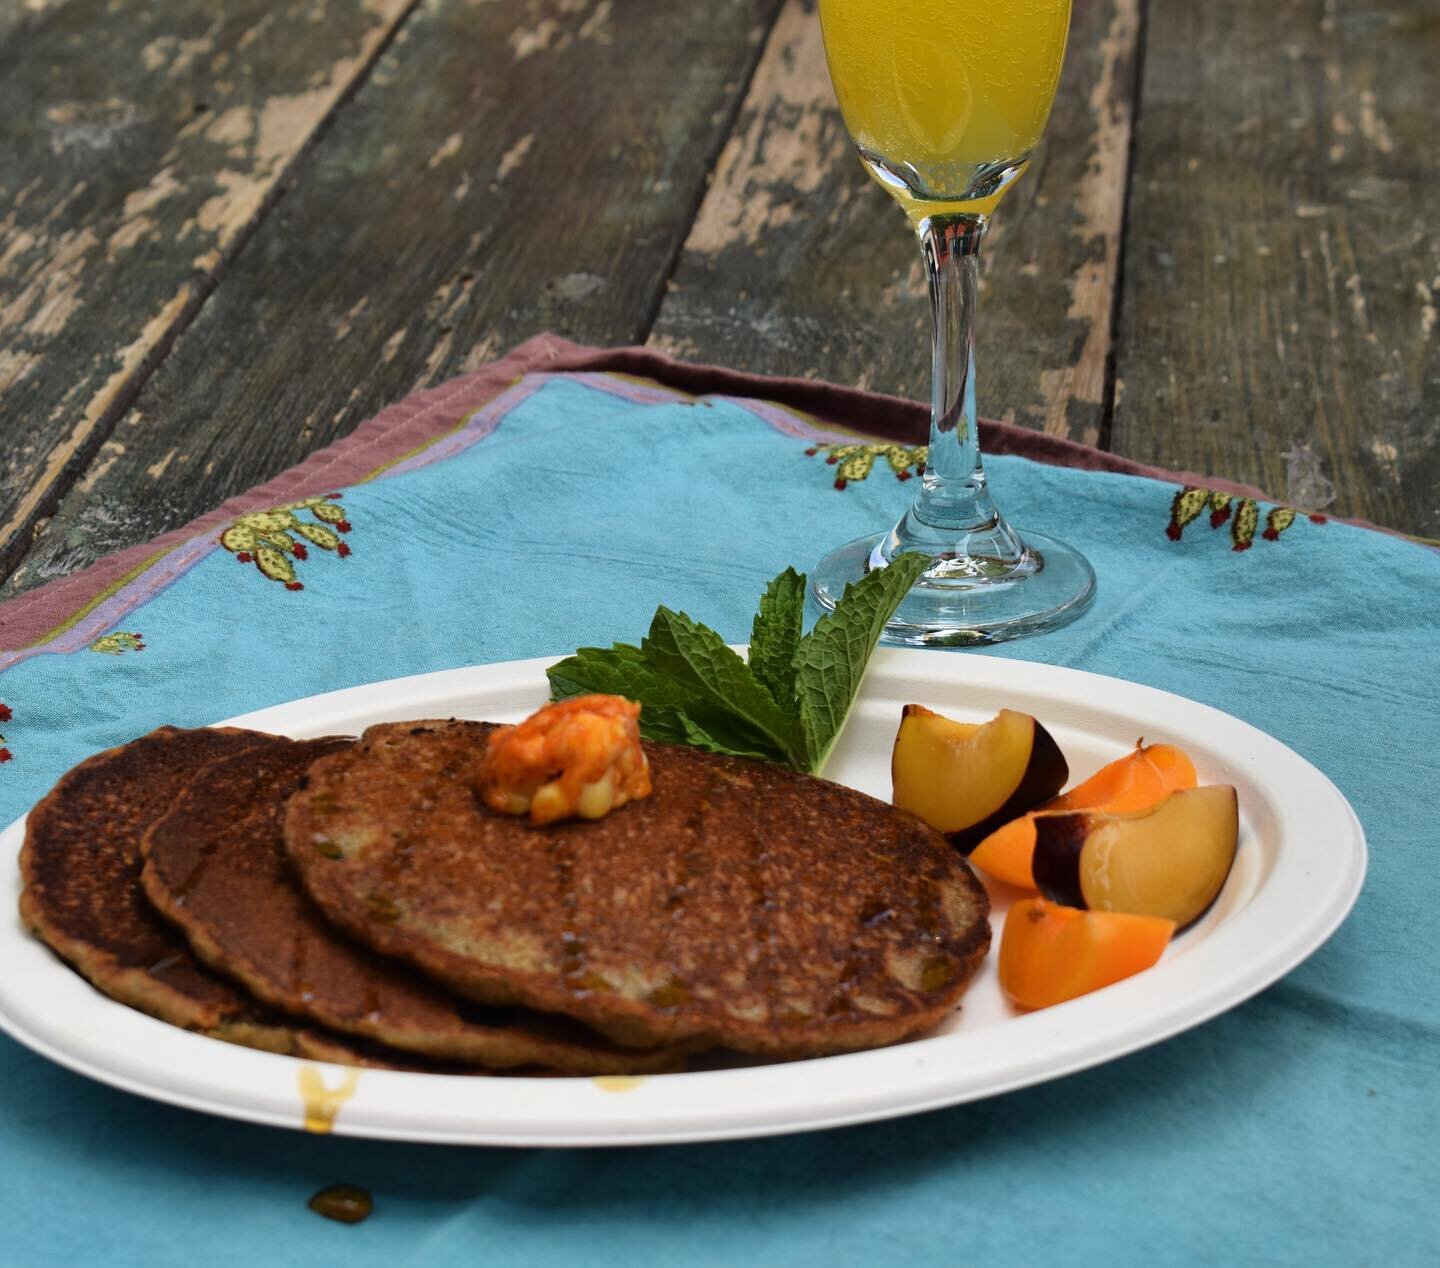 Swing by for some Blue Corn Pancakes until 2pm today and from 12-2pm tomorrow. 

Served with Red Chile Honey Butter and seasonal fruit 😋

#brunch #pancakes #mimosas #weekend #weekendvibes #newmexico